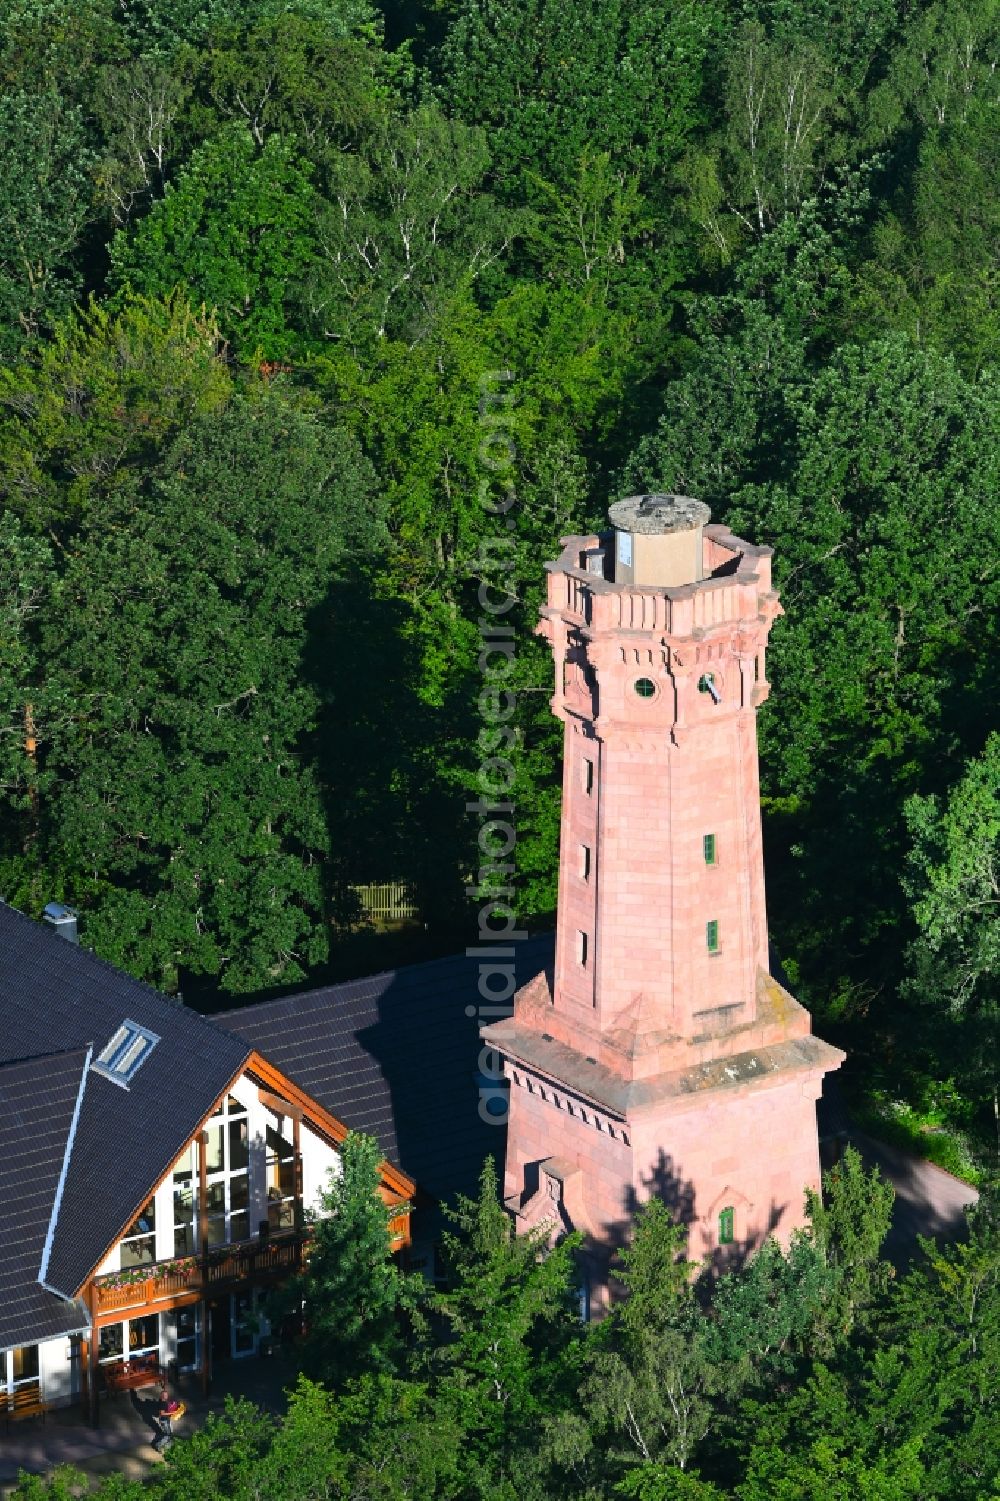 Aerial photograph Nosswitz - Structure of the observation tower Tuermerhaus on Rochlitzer Berg in Nosswitz in the state Saxony, Germany